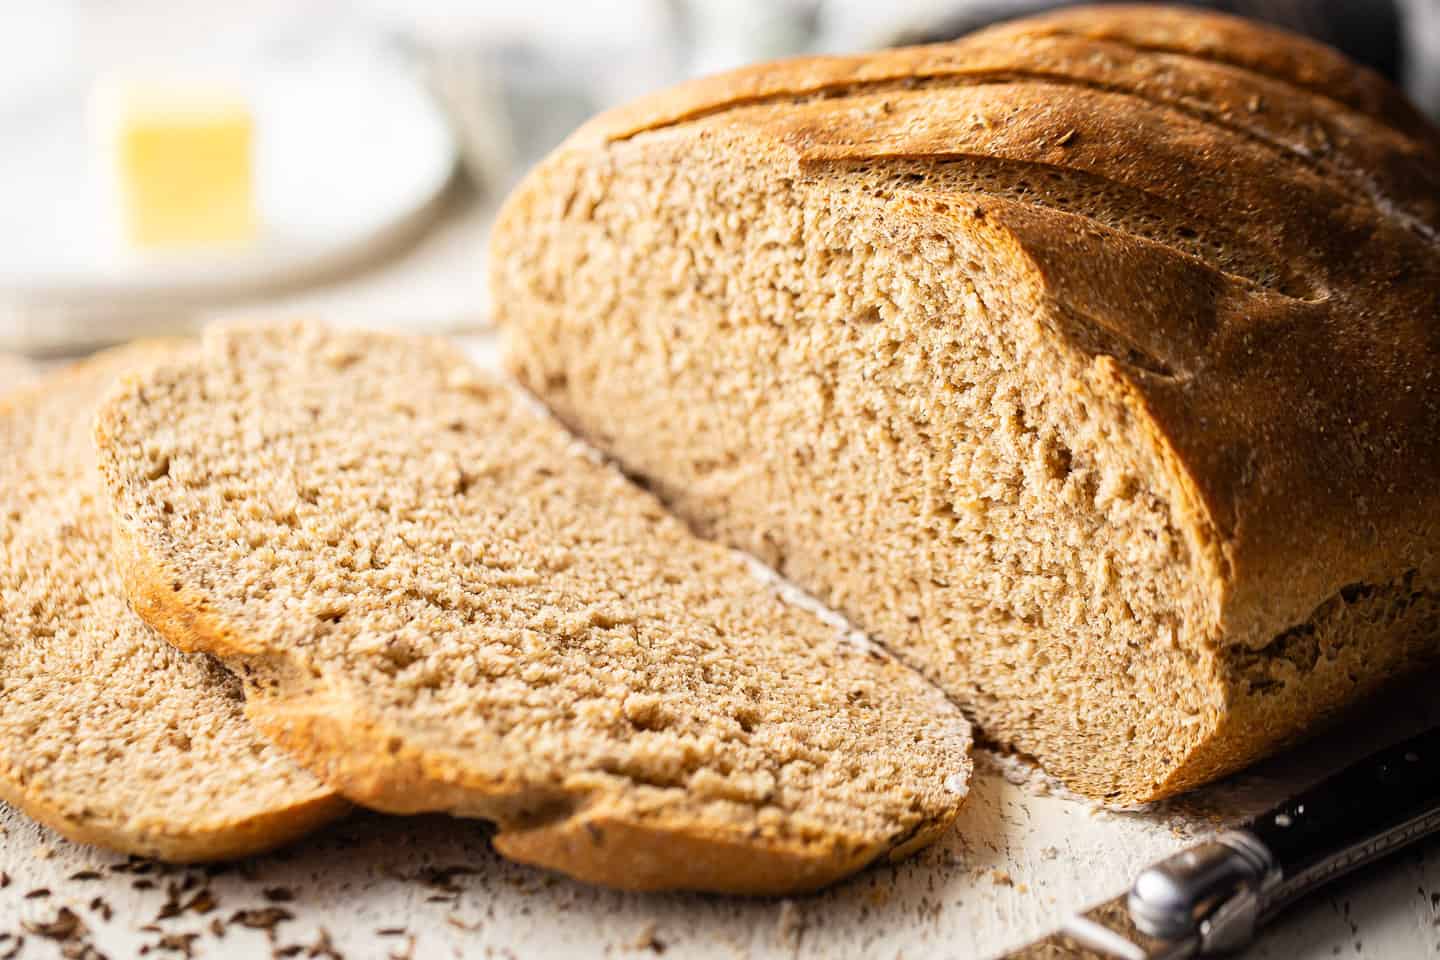 Rye bread recipes made with a crusty exterior and a chewy, pillowy middle.